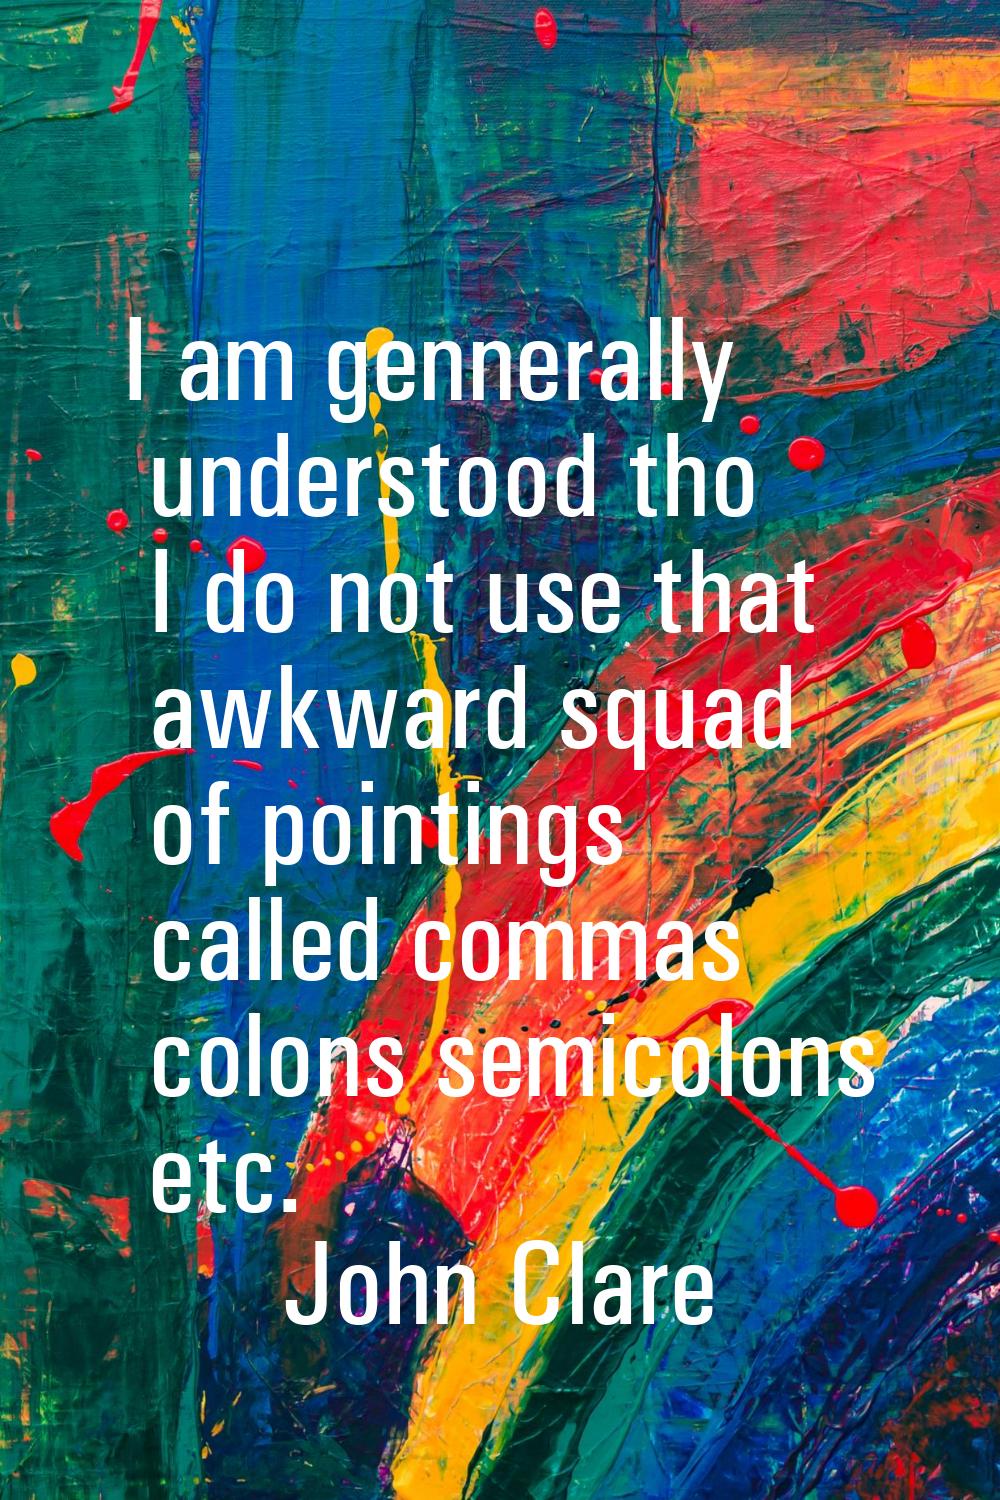 I am gennerally understood tho I do not use that awkward squad of pointings called commas colons se